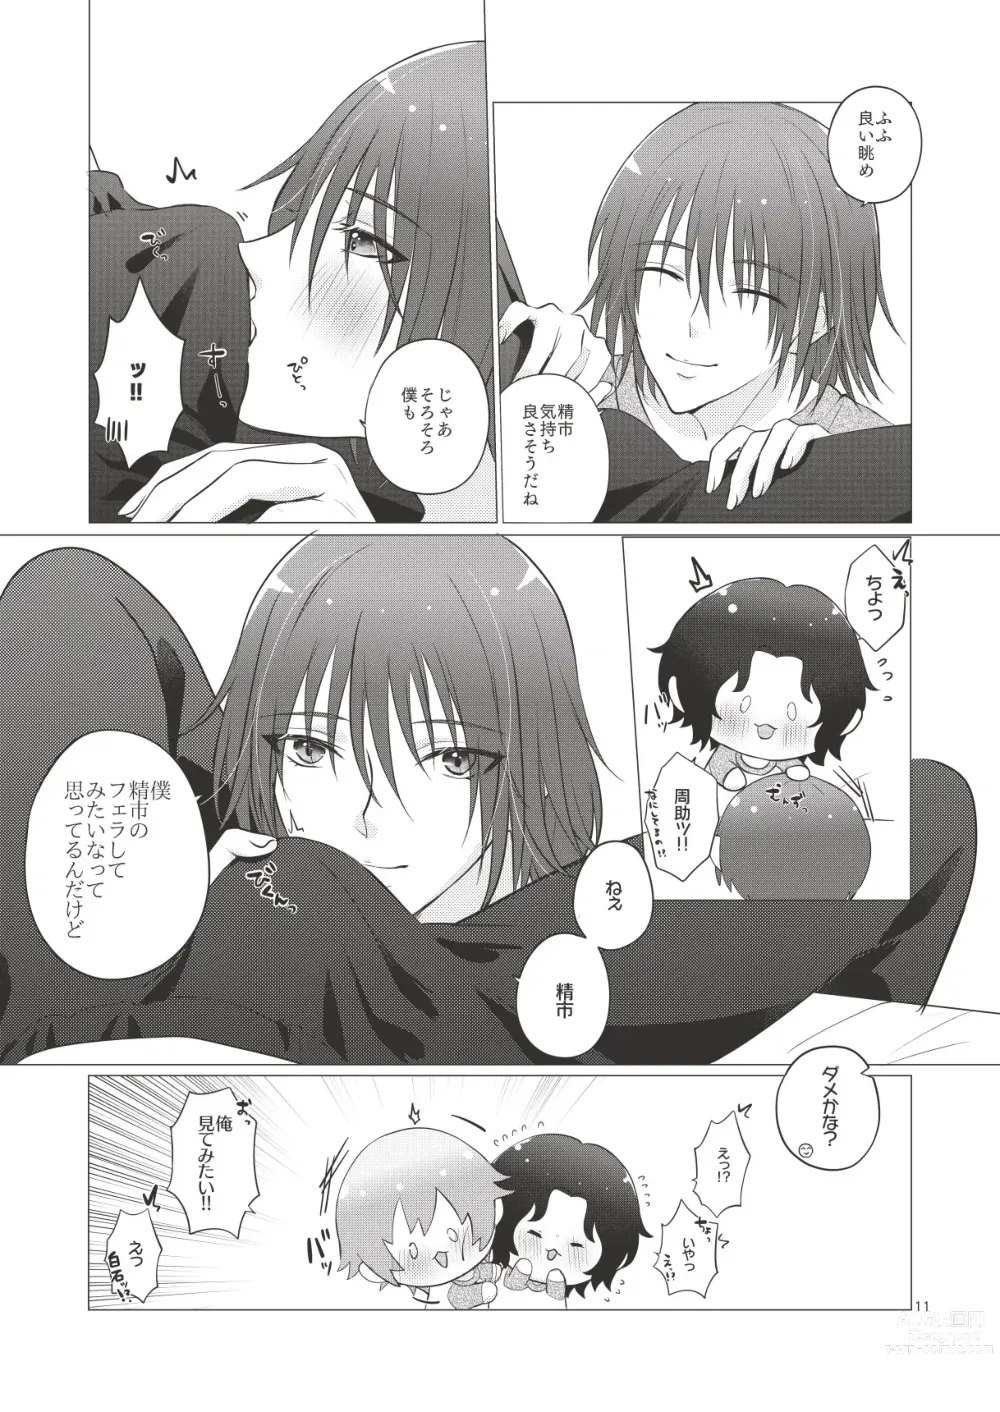 Page 10 of doujinshi Bonds of affection